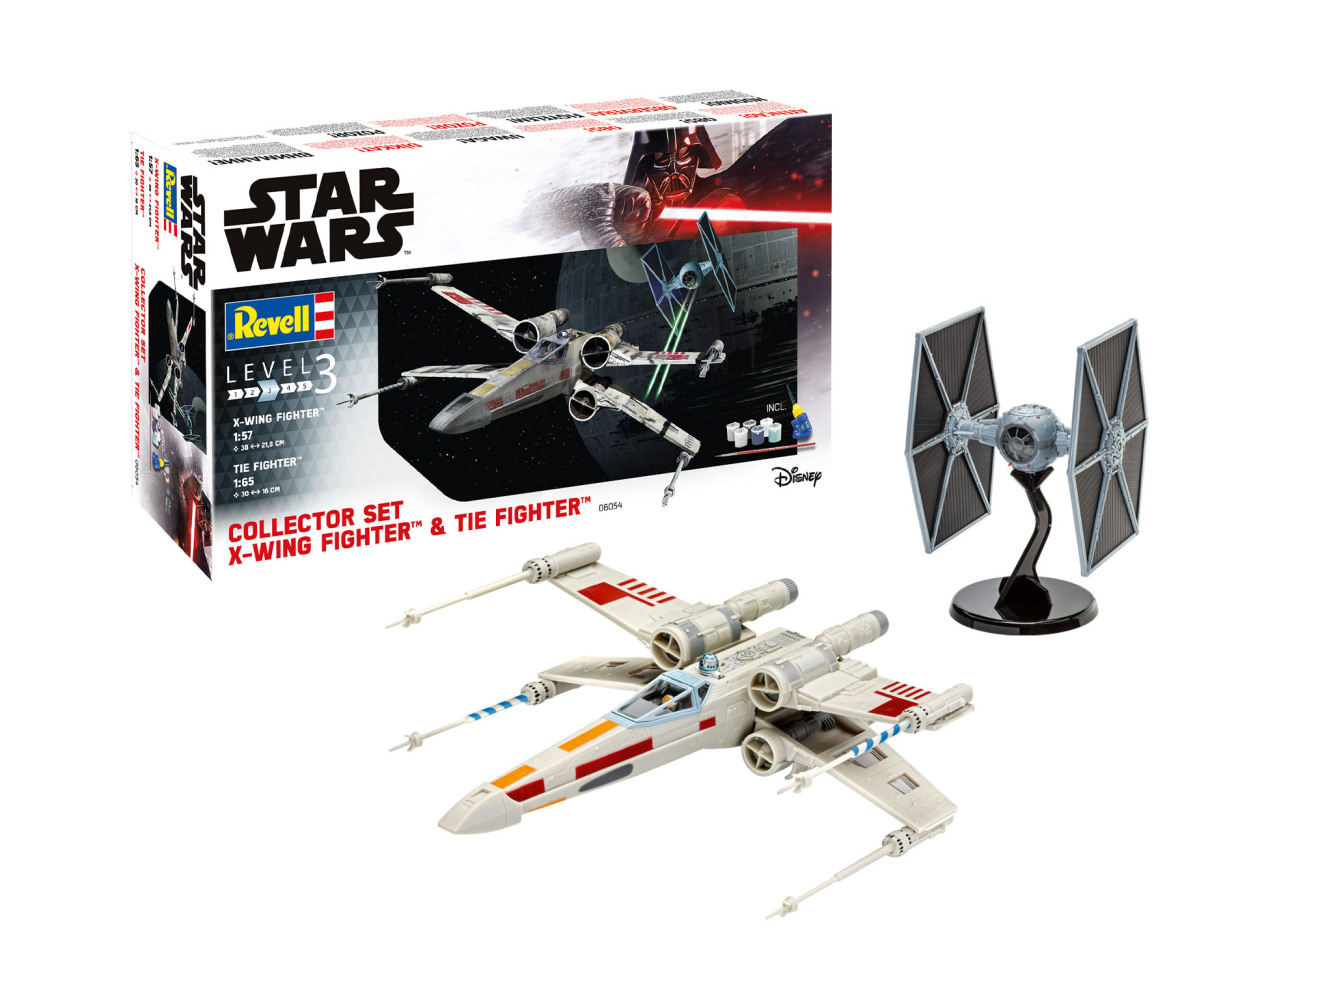 Star Wars Collector Set X-Wing Fighter + TIE Fighter 